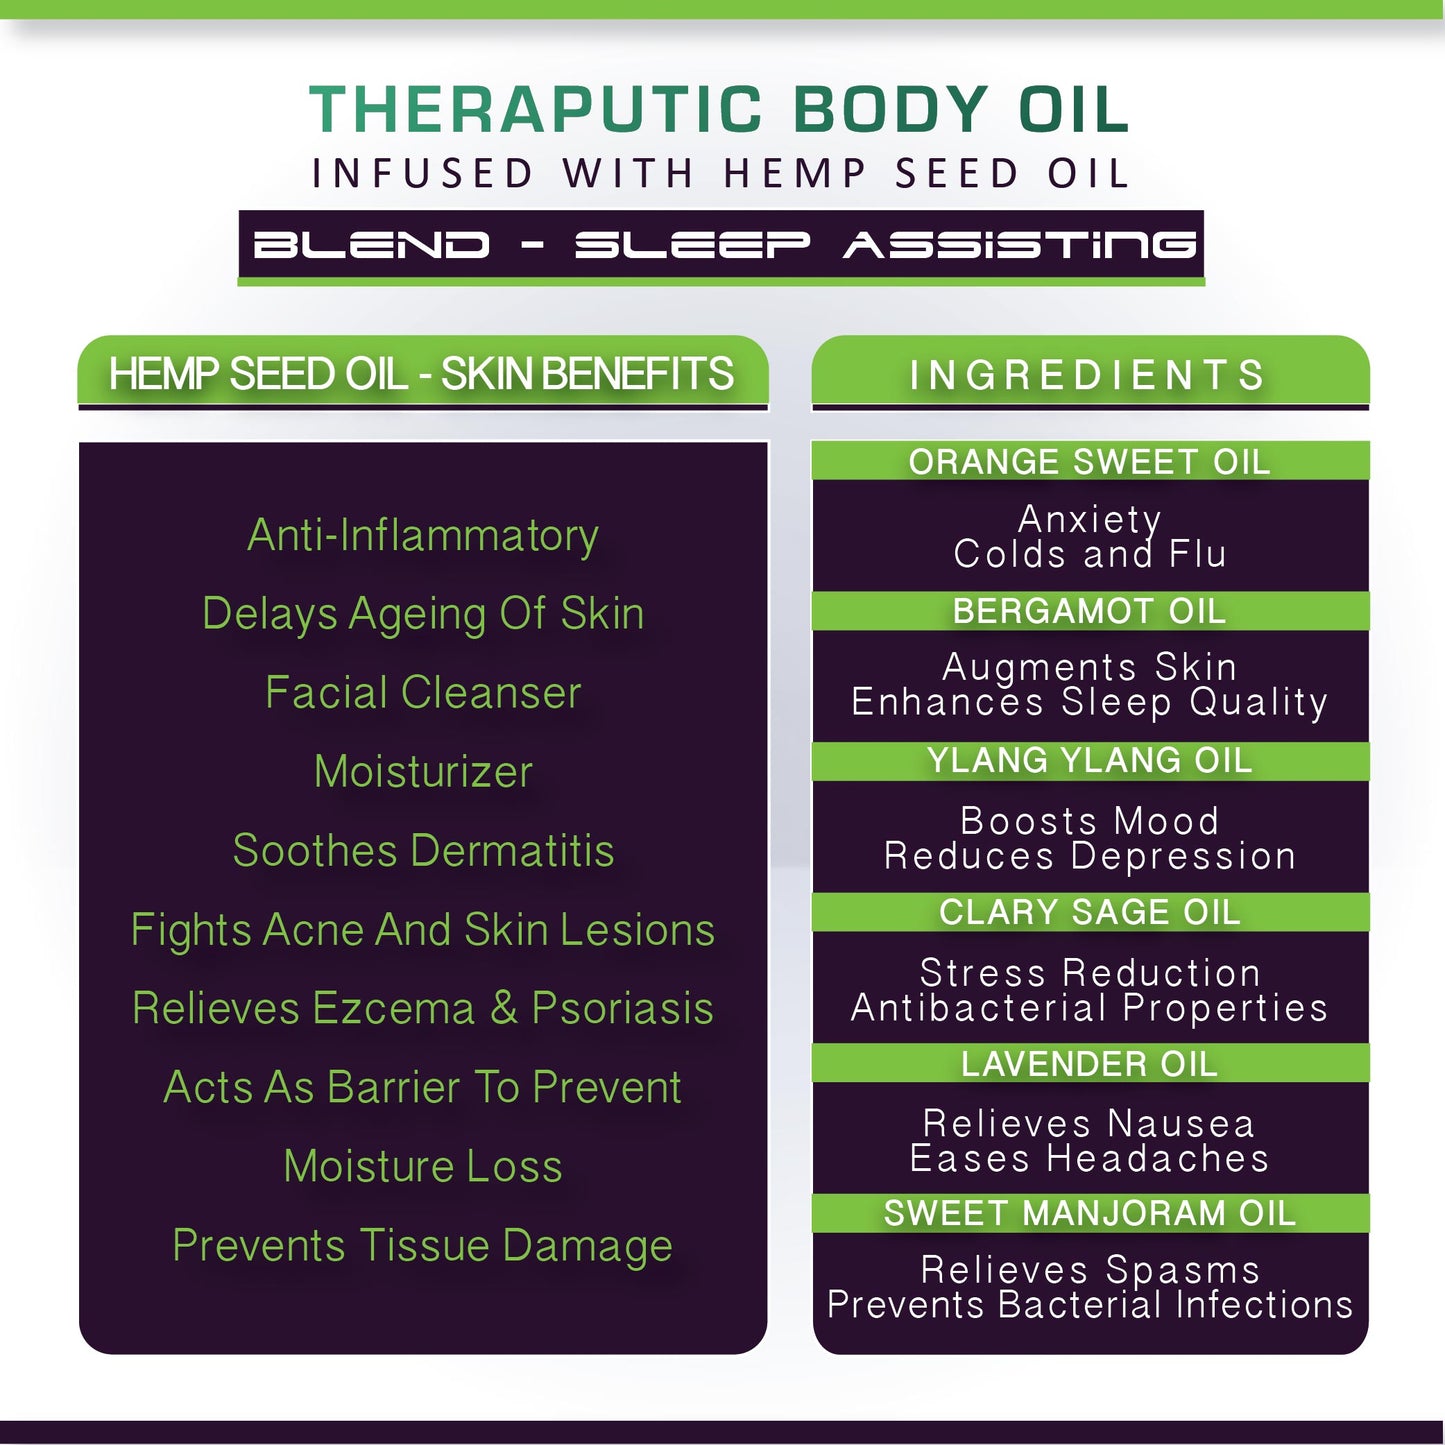 Buy Cure By Design Therapeutic Body Oil for Sleep Assisting from Hempivate 